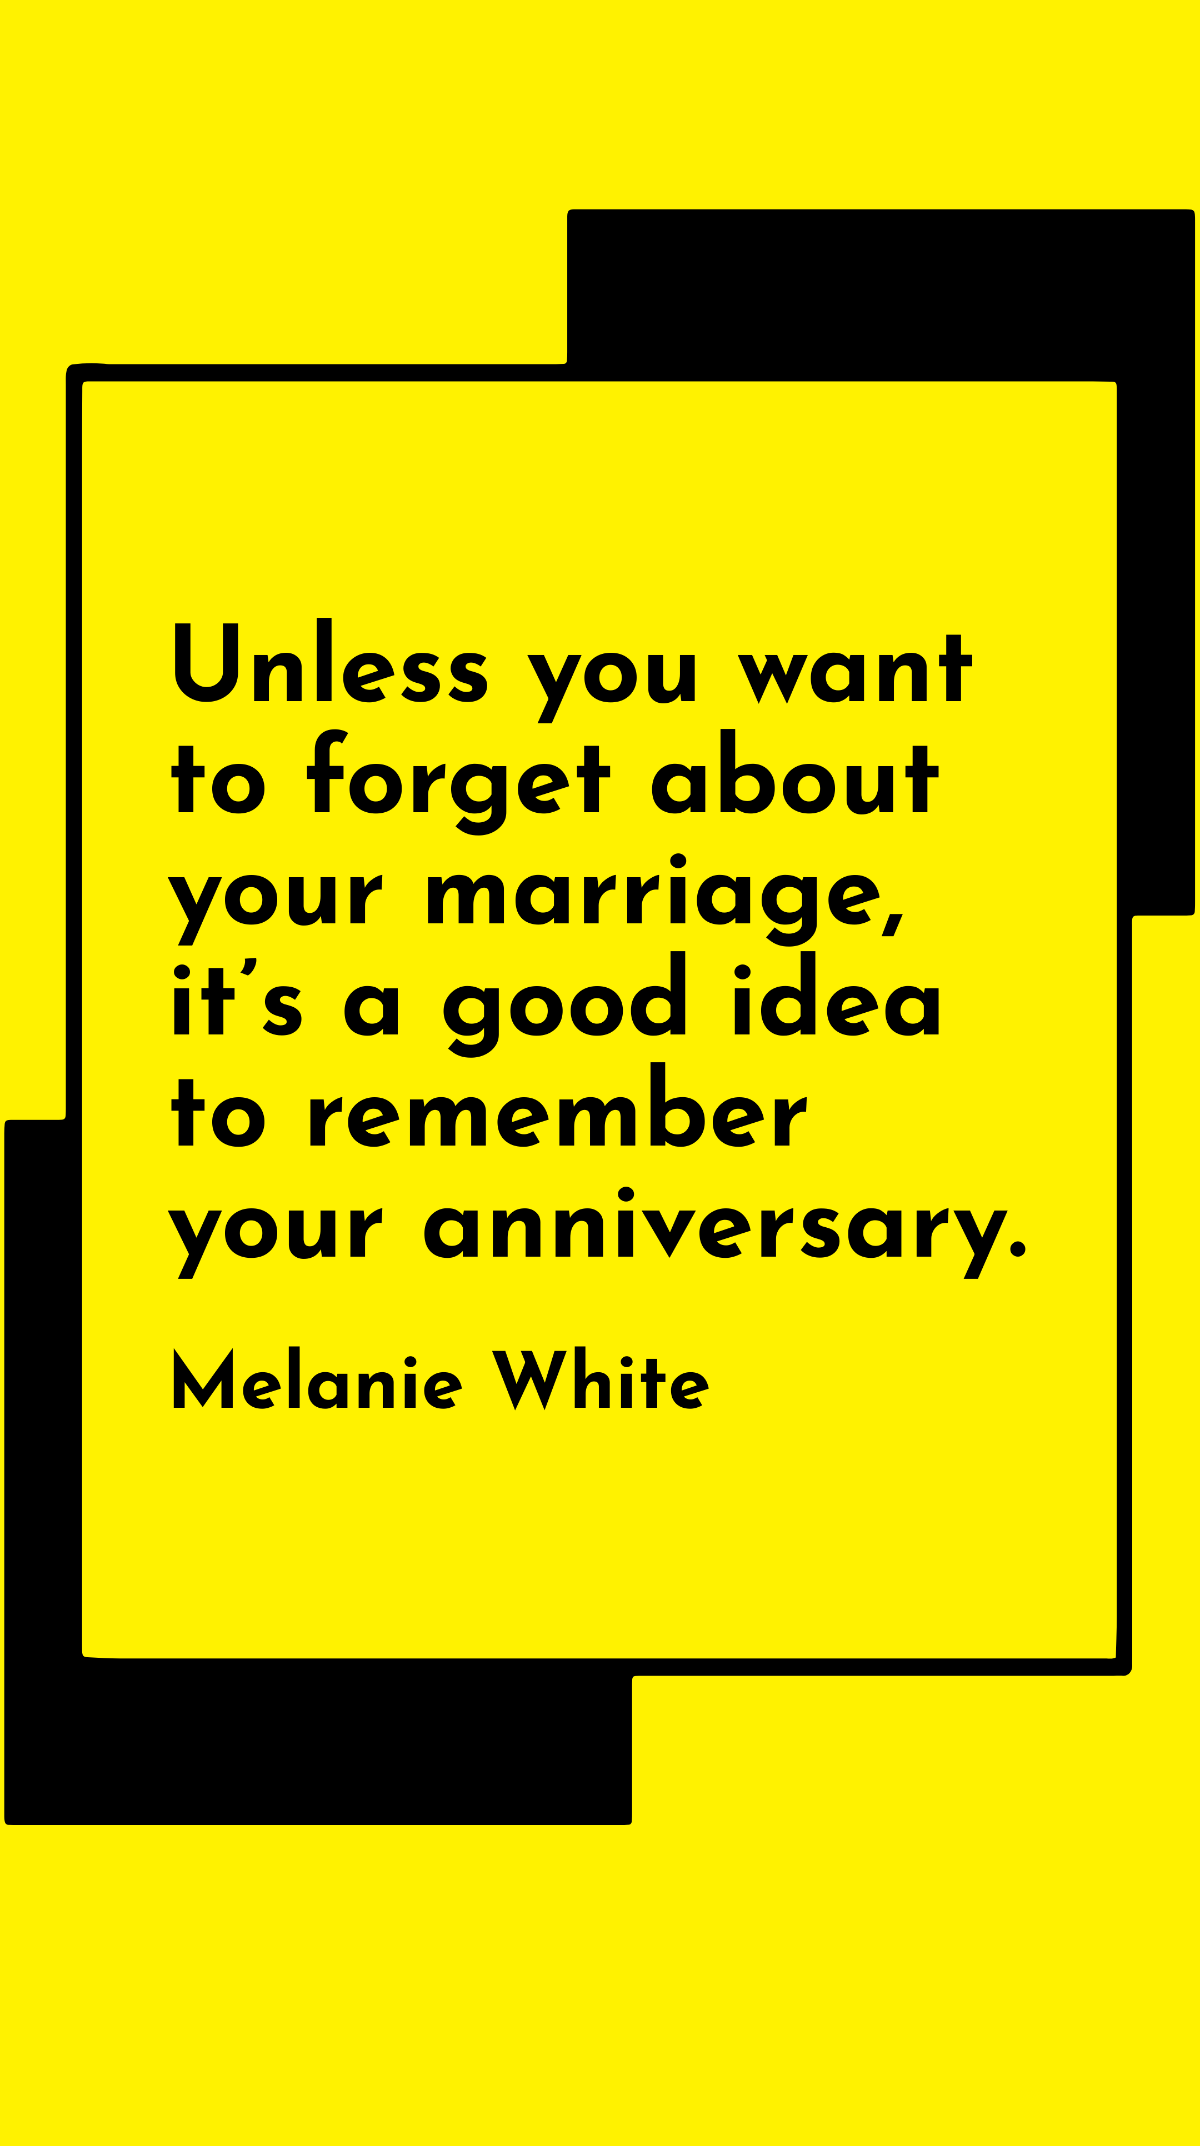 Melanie White - Unless you want to forget about your marriage, it’s a good idea to remember your anniversary. Template